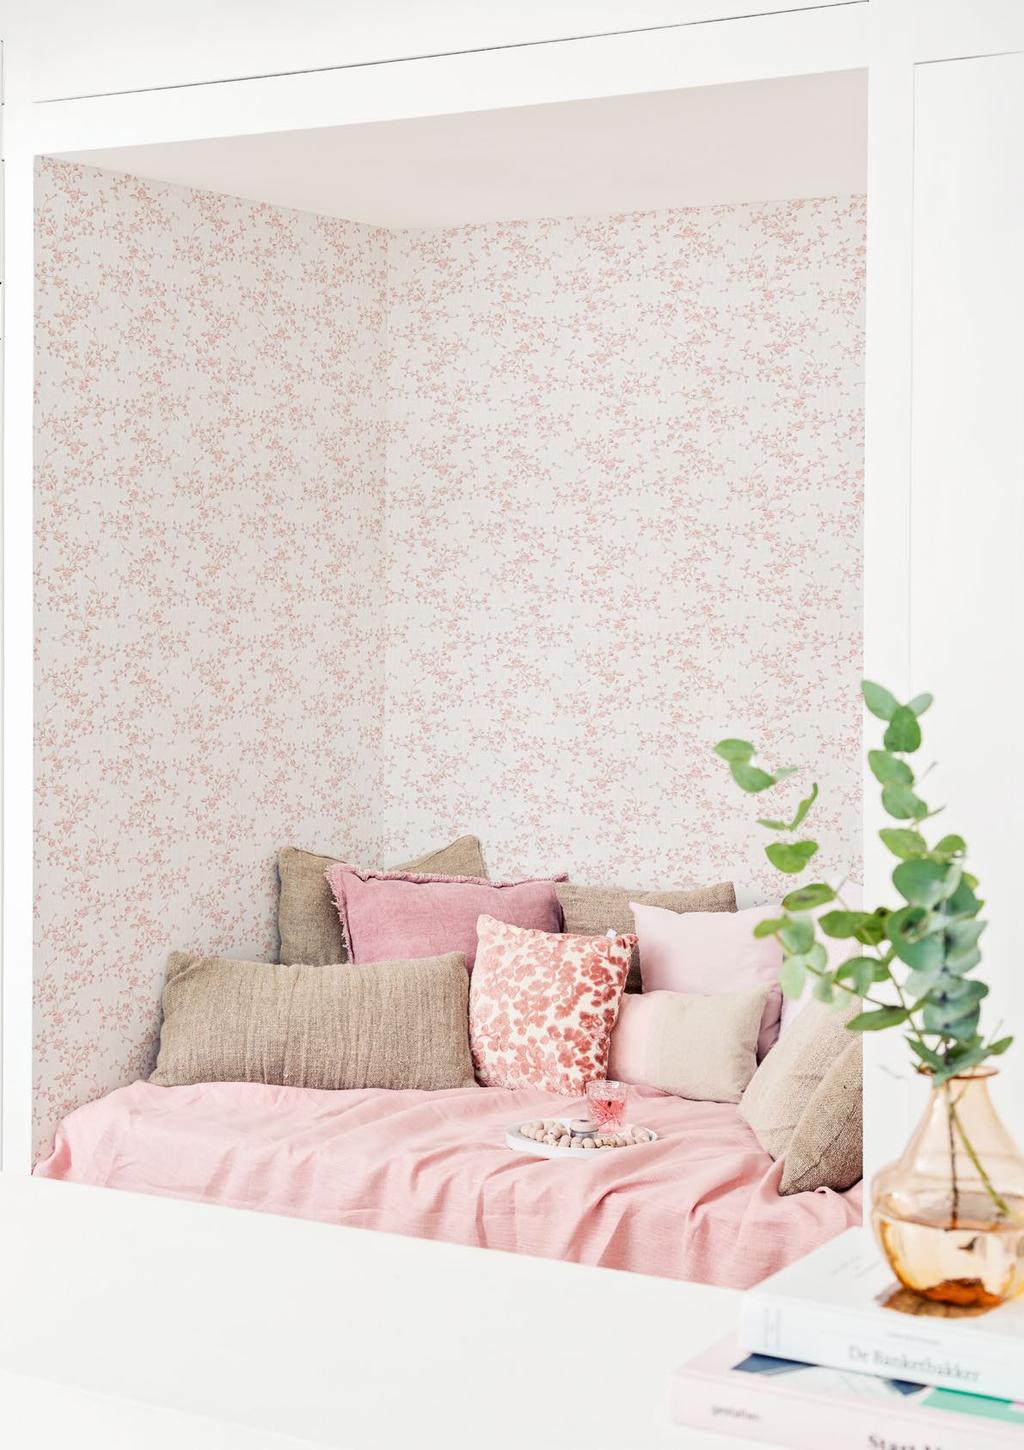 Feminine AND SOFT Feminine rooms have a distinct style and aura of their own that makes them both inviting and visually appealing.